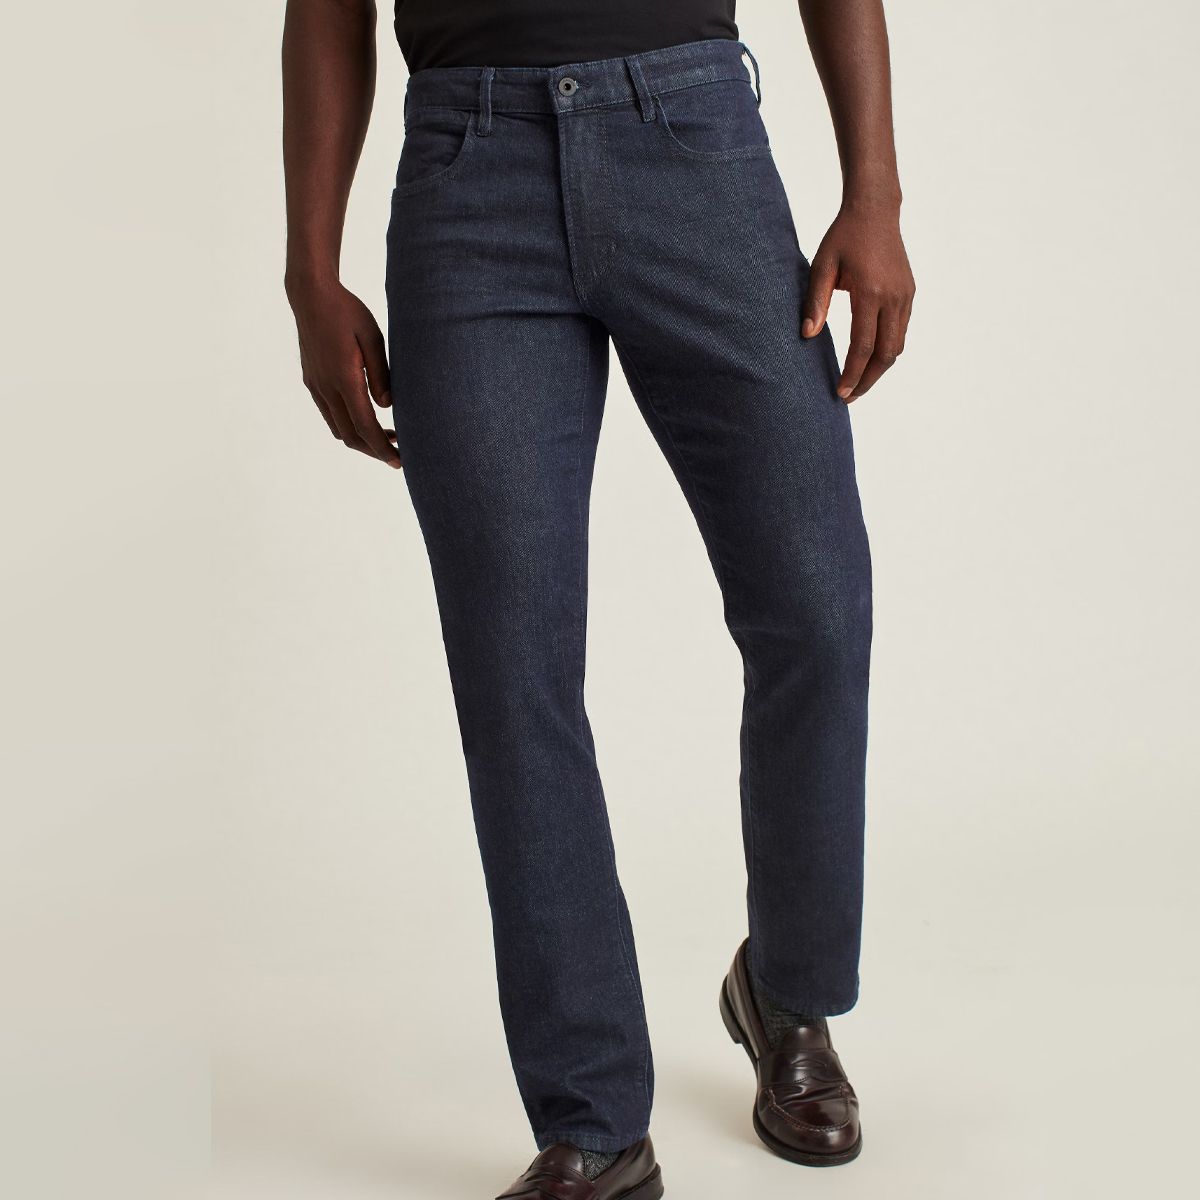 The 12 Best Men’s Jeans for Every Guy’s Style and Budget – Over View ...